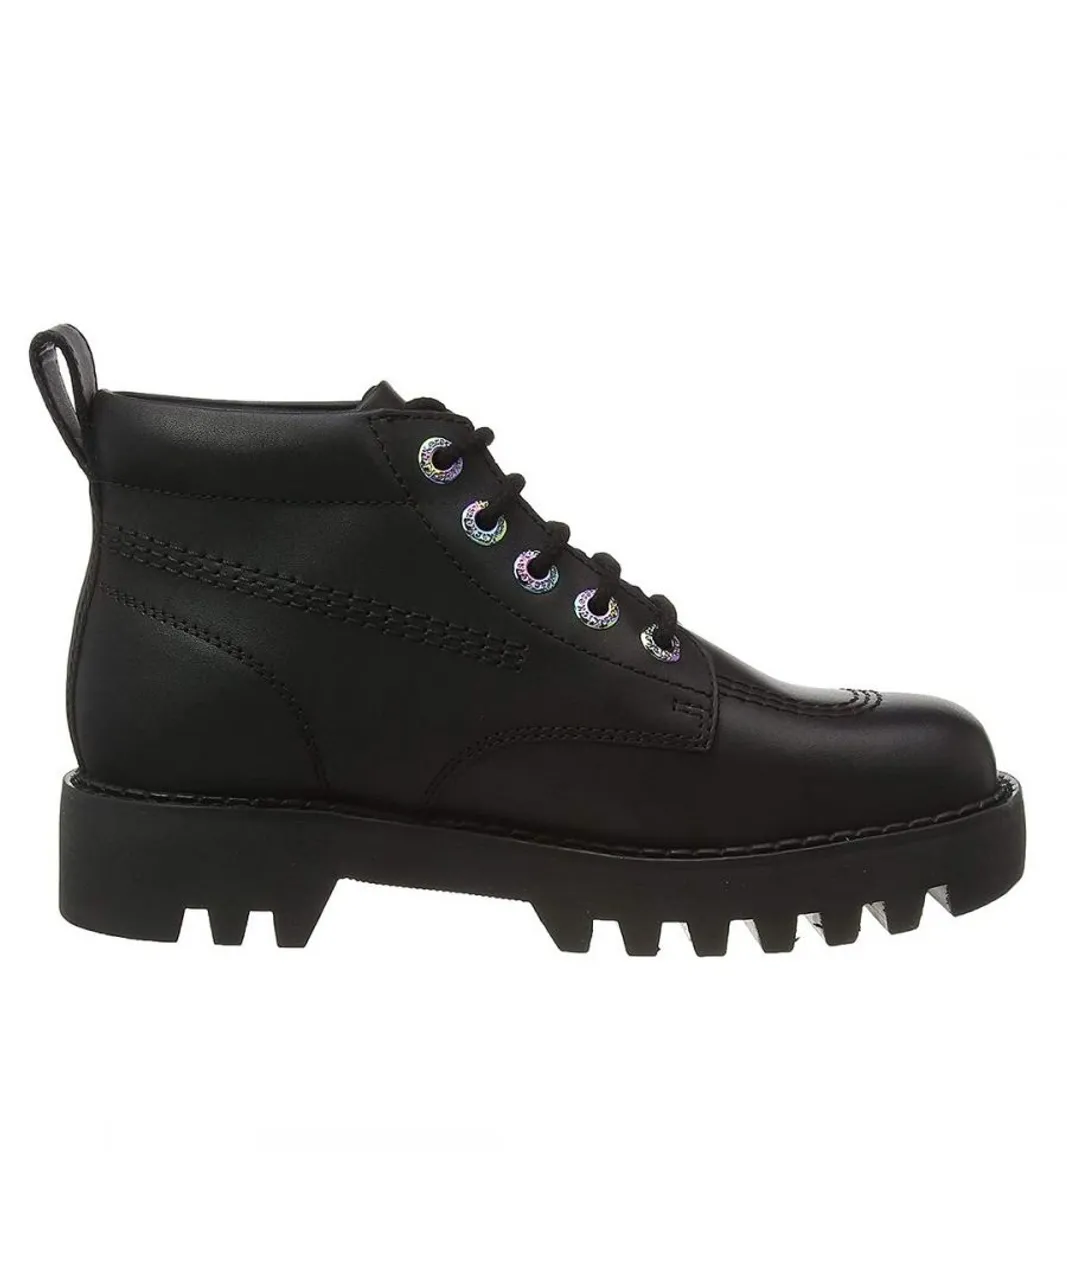 Kickers Kizziie Higher Womens Black Boots Leather